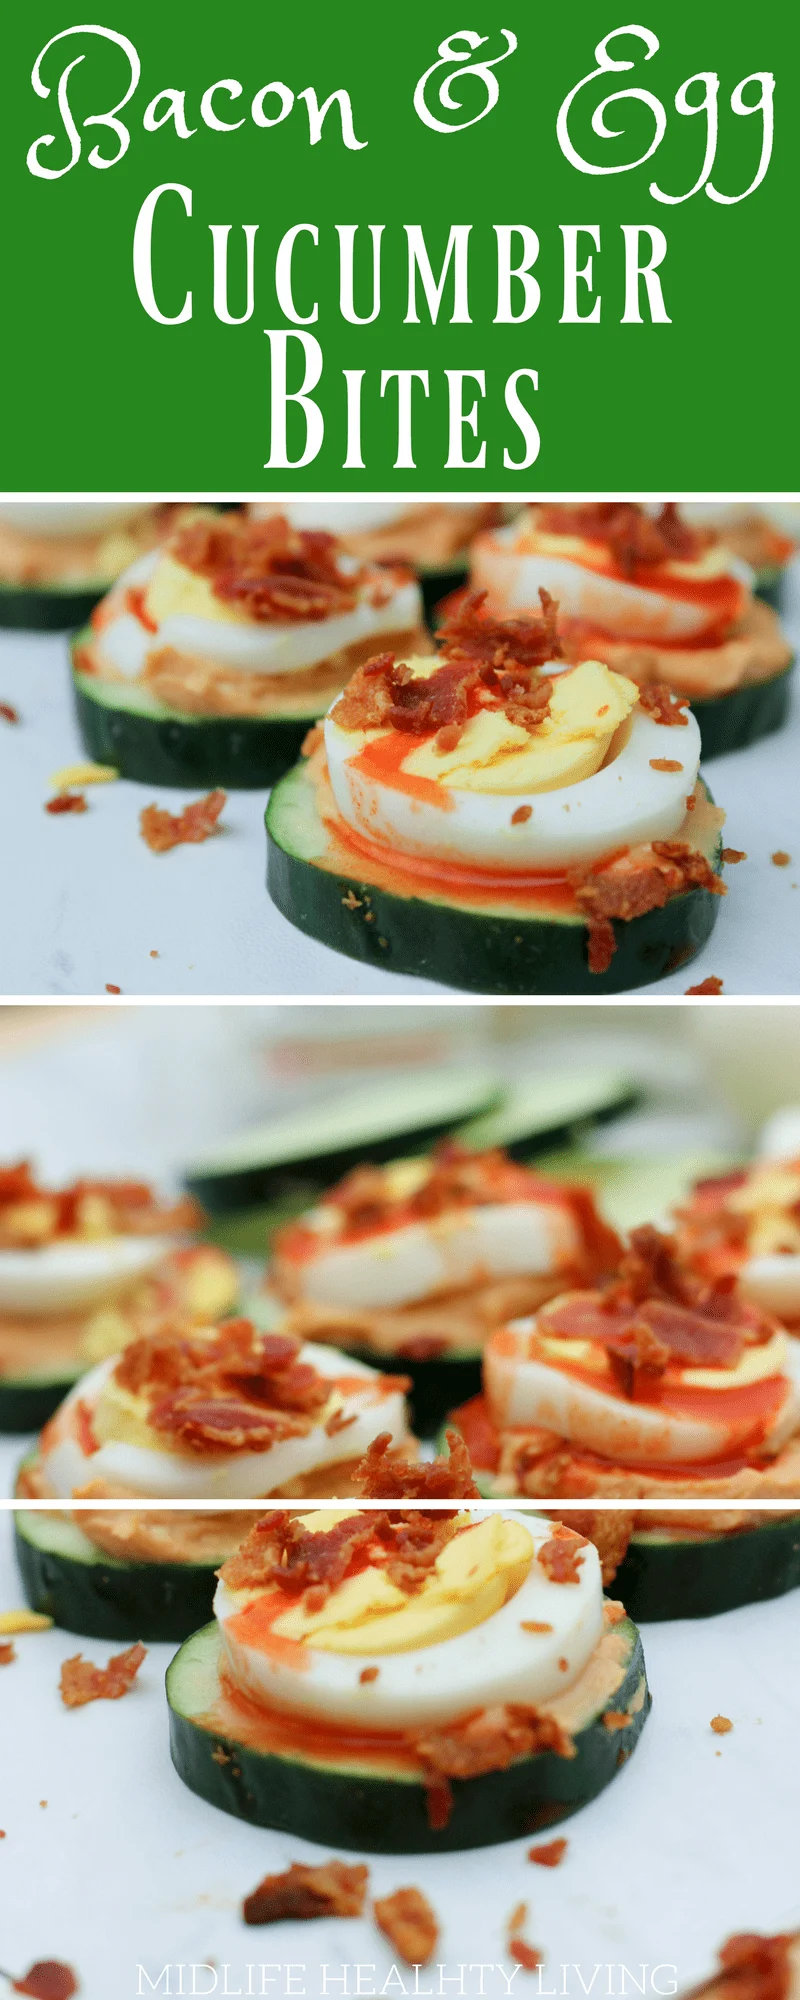 One of the best ways to eat better is to plan ahead. Luckily, these Bacon and Egg Cucumber Bites are easy to make for a big crowd or just one. They are packed full of protein and flavor. The best part is there is no cooking involved and you can prepare and serve them in less than 10 minutes. 